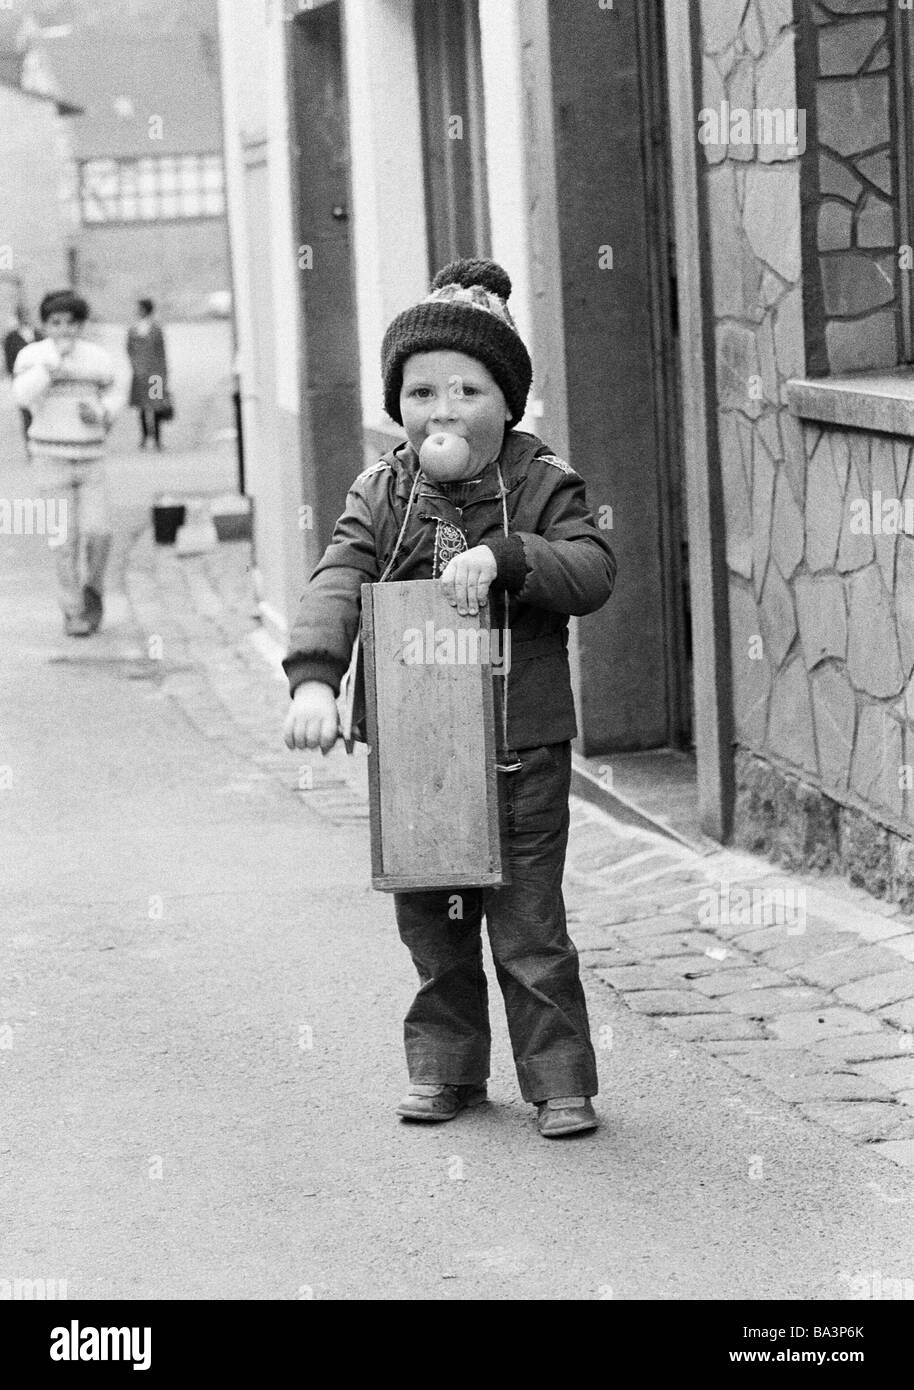 Seventies, black and white photo, people, children, little boy with a ratch or rattle, apple in the mouth, aged 4 to 7 years, Easter Customs in the Eifel region, in the Holy Week in rural areas local children walk around with ratches or rattles, symbolically this rasping or rattling shall replace the peal of bells because in the Passion Week all bells had been travelled to Rome, D-Monreal, Elz, Elzbach, Elz Valley, Eifel, Verbandsgemeinde Vordereifel, Rhineland-Palatinate Stock Photo